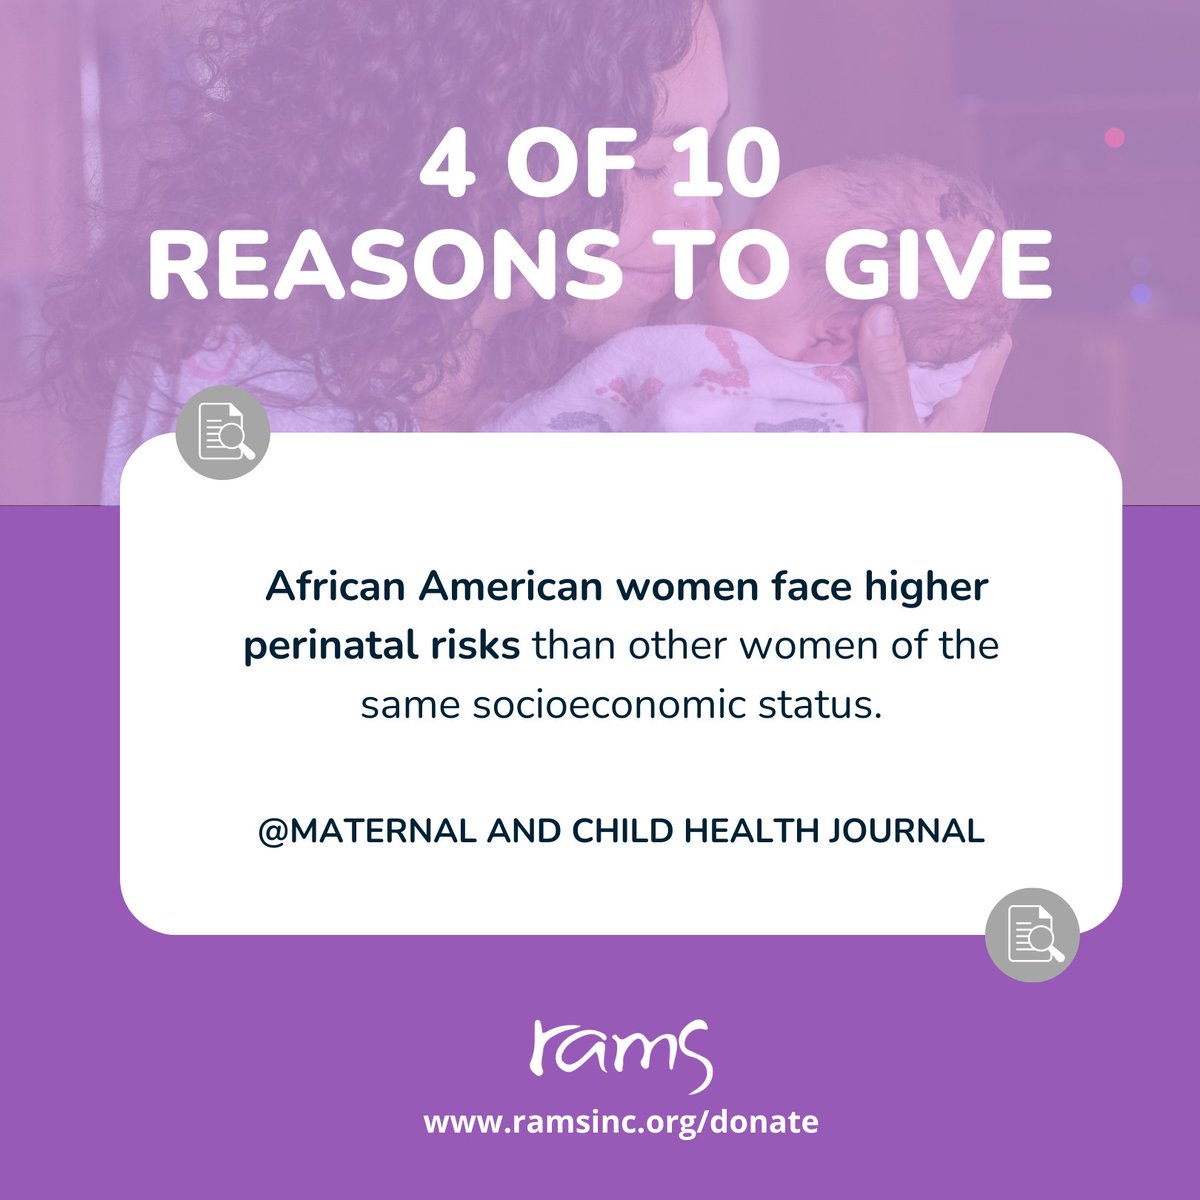 Day 4 of 10 Reasons to Give to RAMS: Our newly funded Equity Based Maternal Health Program provides racially conscious prenatal & mental health care black birthing people deserve regardless of background. Donate to help us bridge the birthing gap: ramsinc.org/donate